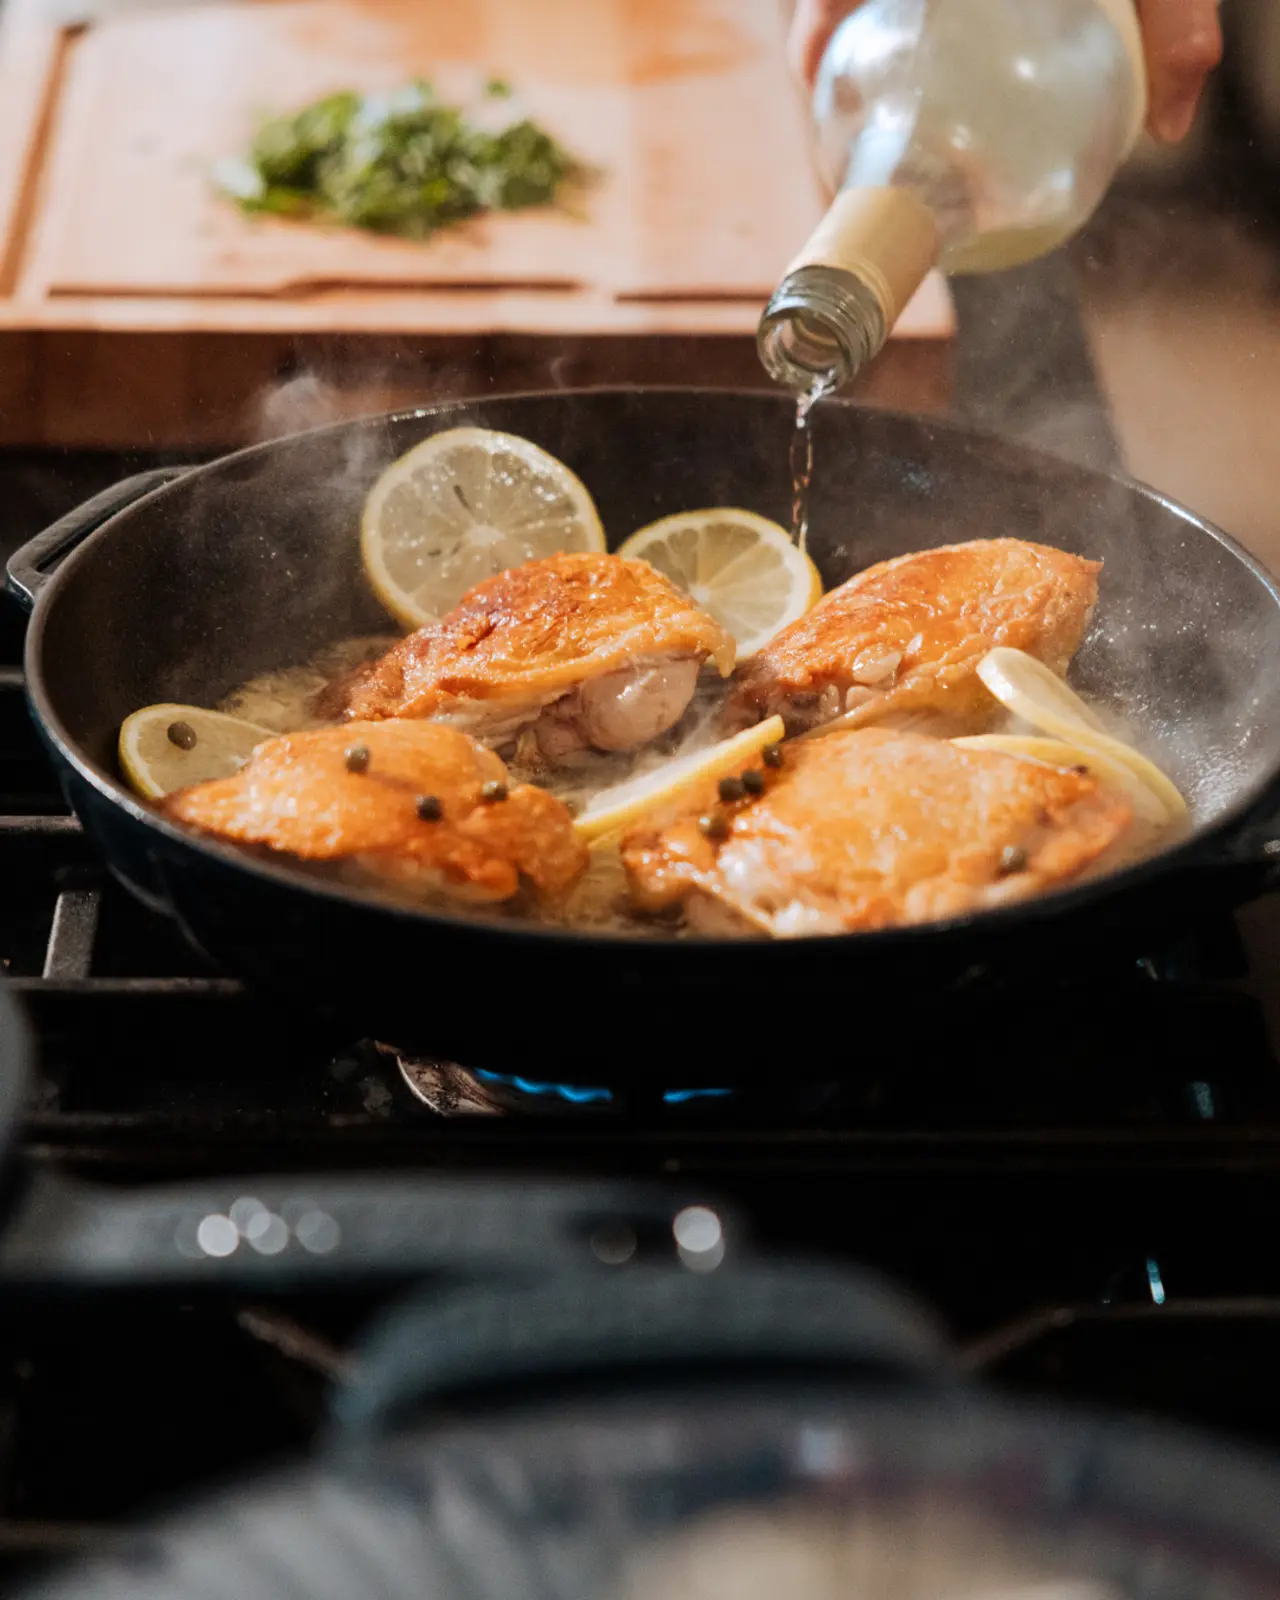 Juice is being poured over sizzling chicken breasts in a pan, accompanied by lemon slices and herbs in the background.